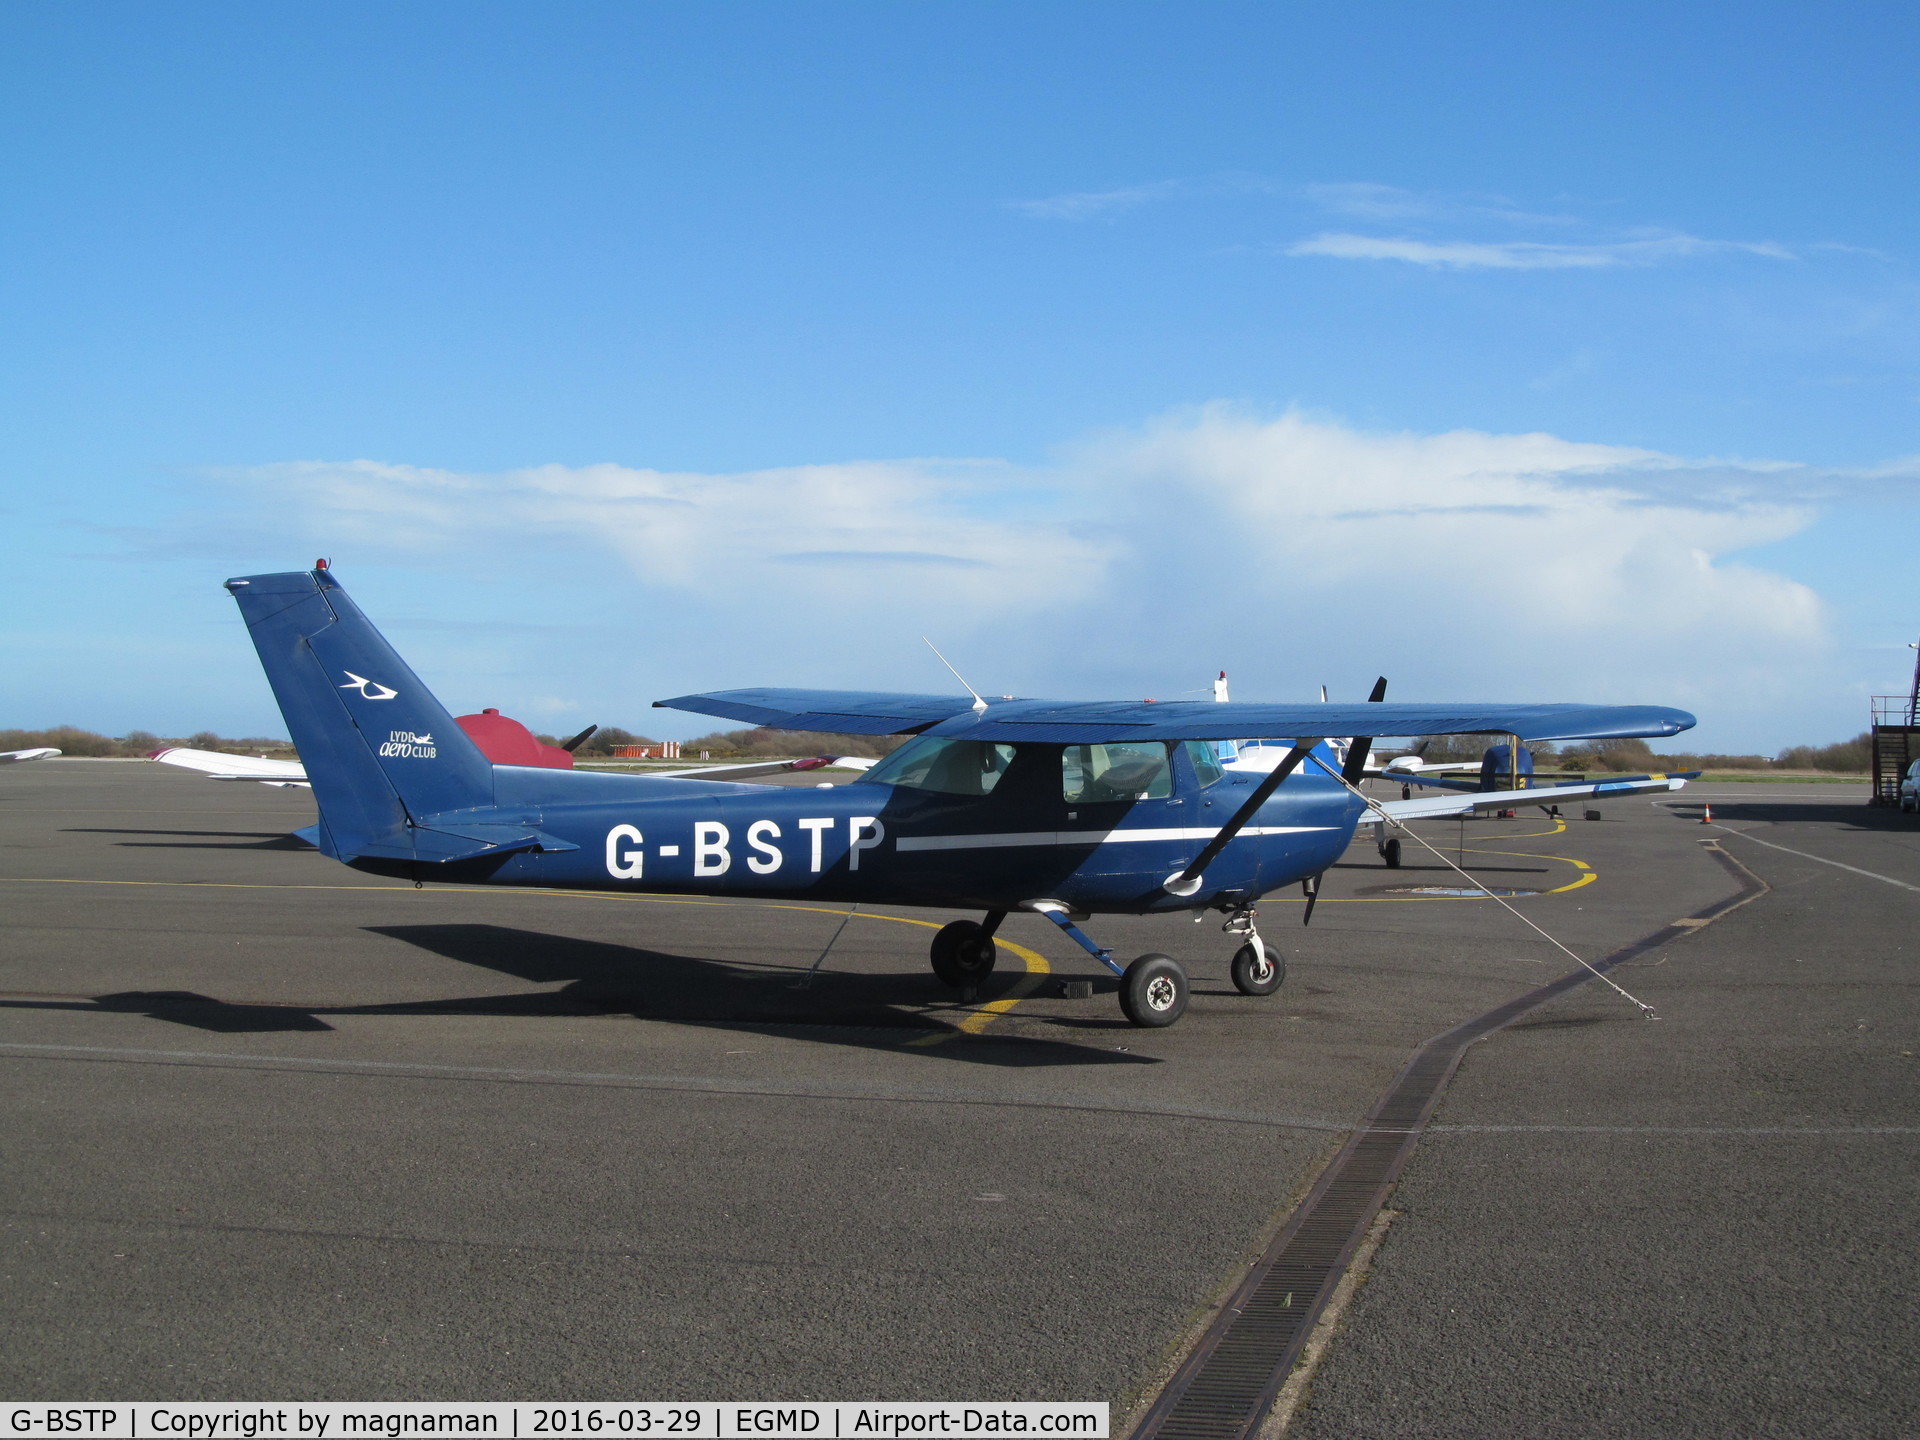 G-BSTP, 1978 Cessna 152 C/N 152-82925, sunny apron at lydd